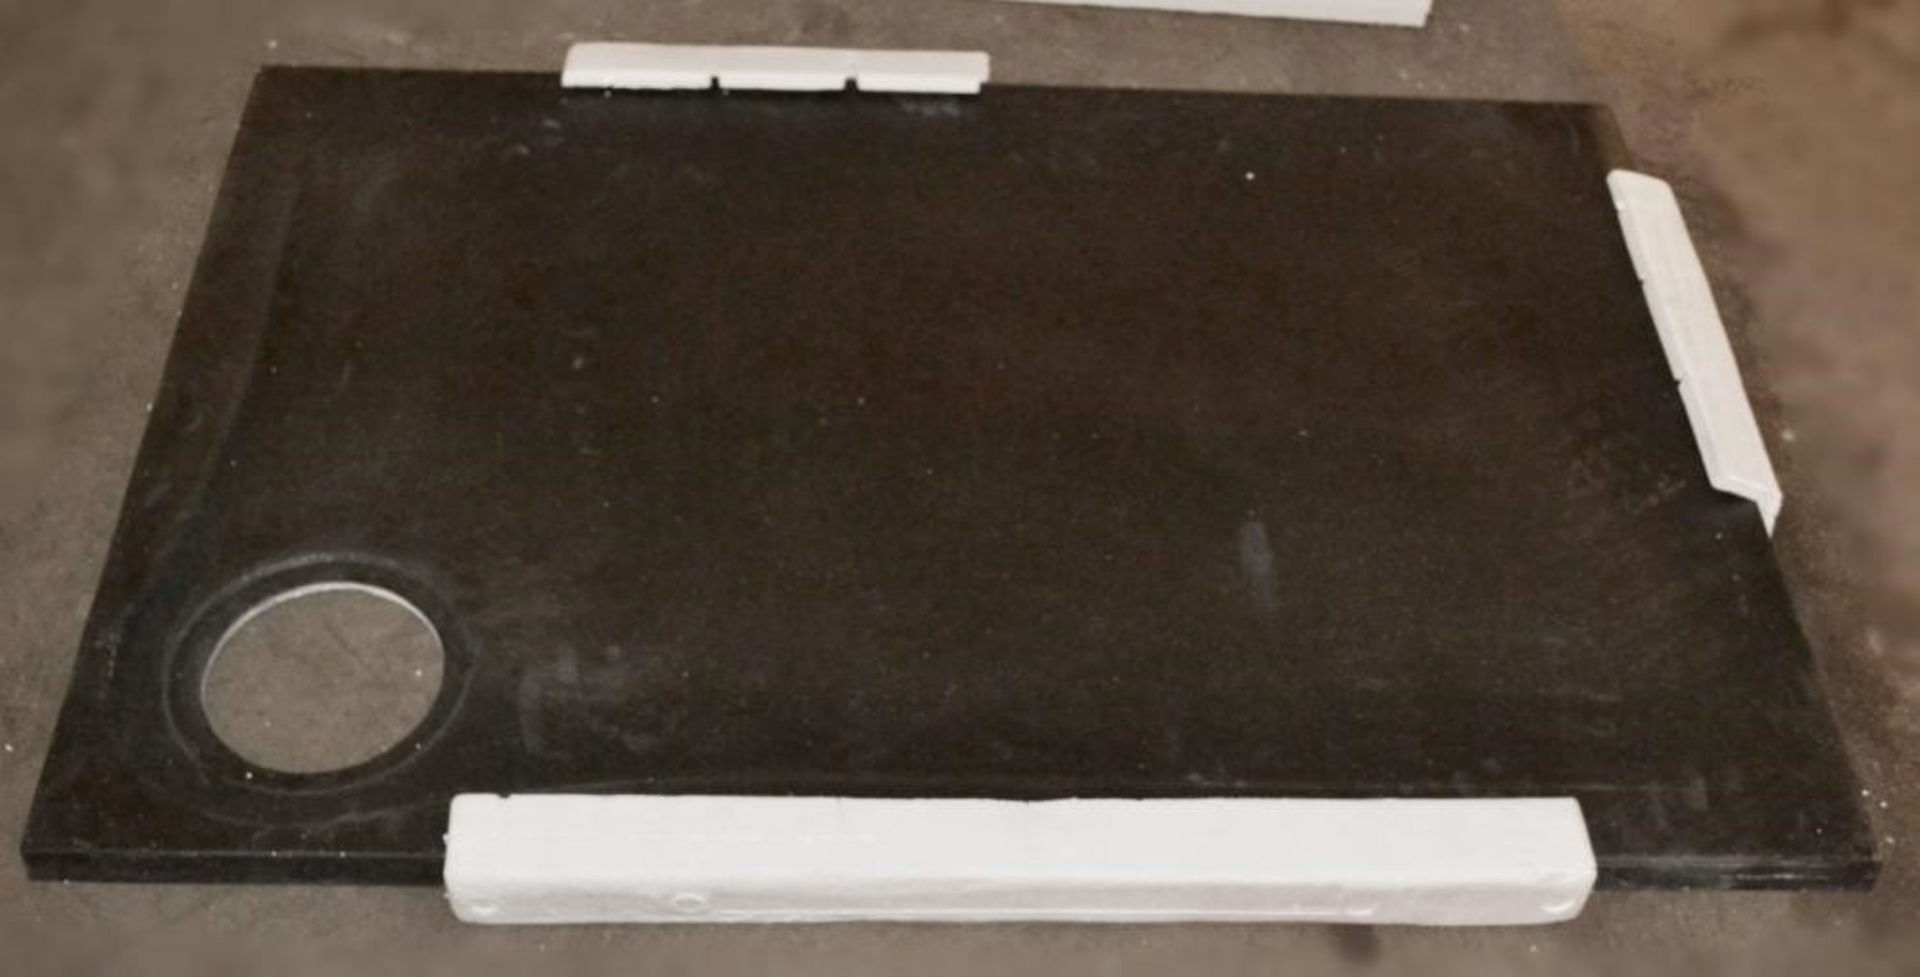 1 x Black Rectangular Shower Tray With Drain Cover - Dimensions: 1200 x 800 x 30mm - New / Unused - Image 5 of 7